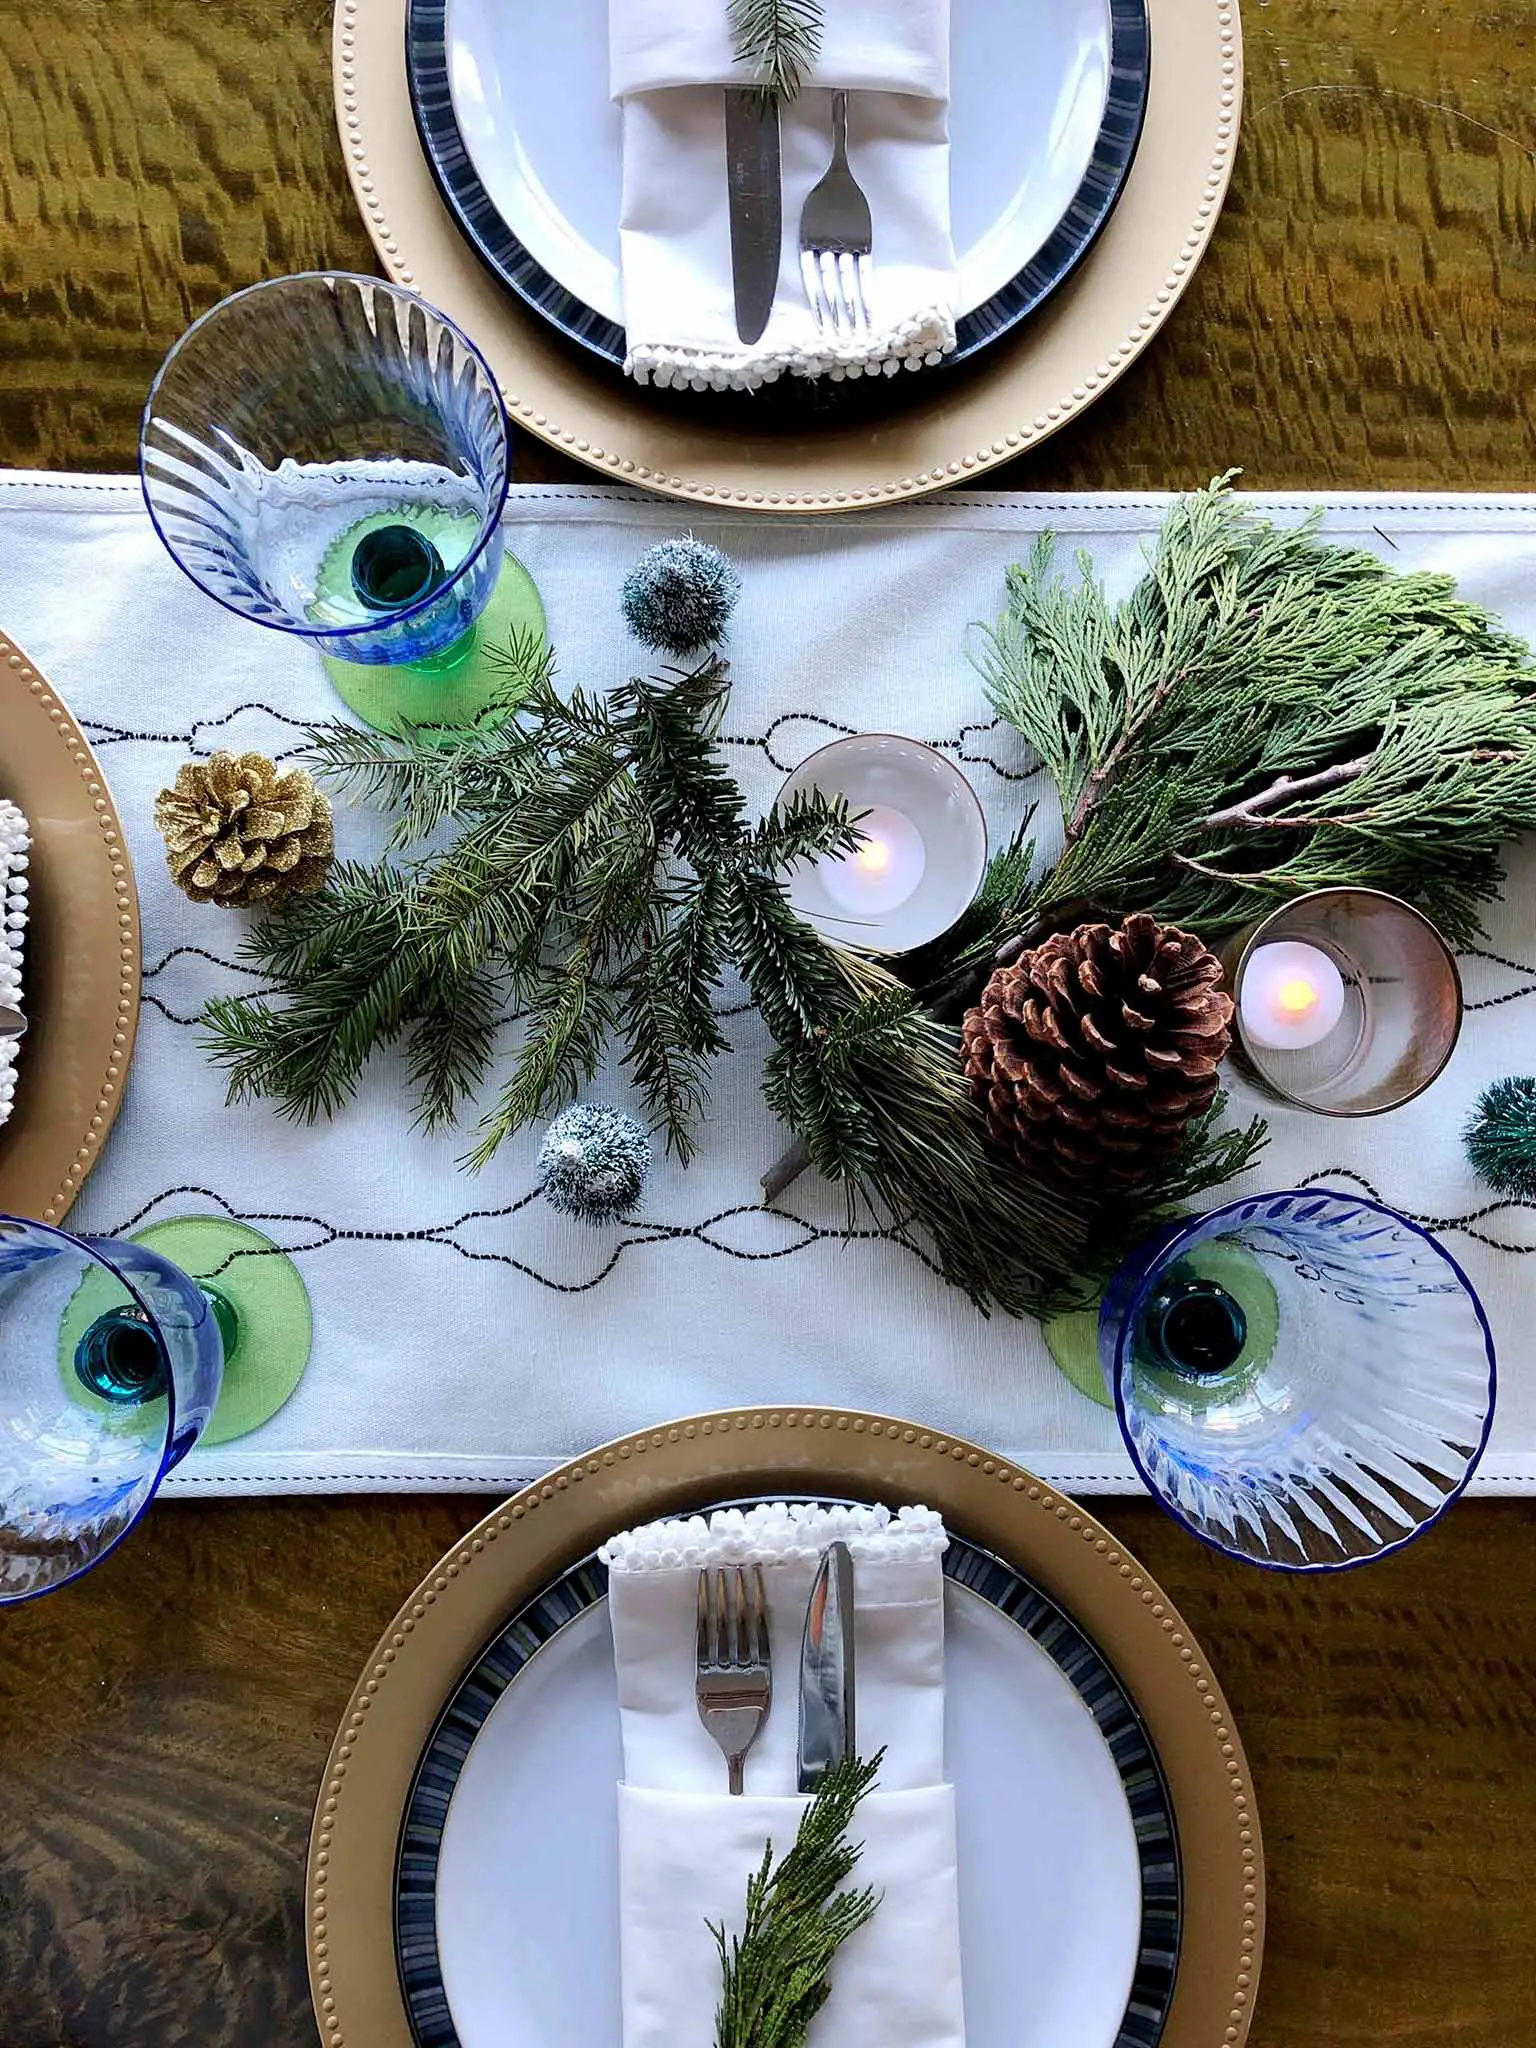 Greenery | How to Create a Beautiful Tablescape on a Budget | That Homebird Life Blog #christmasdecor #tablescape